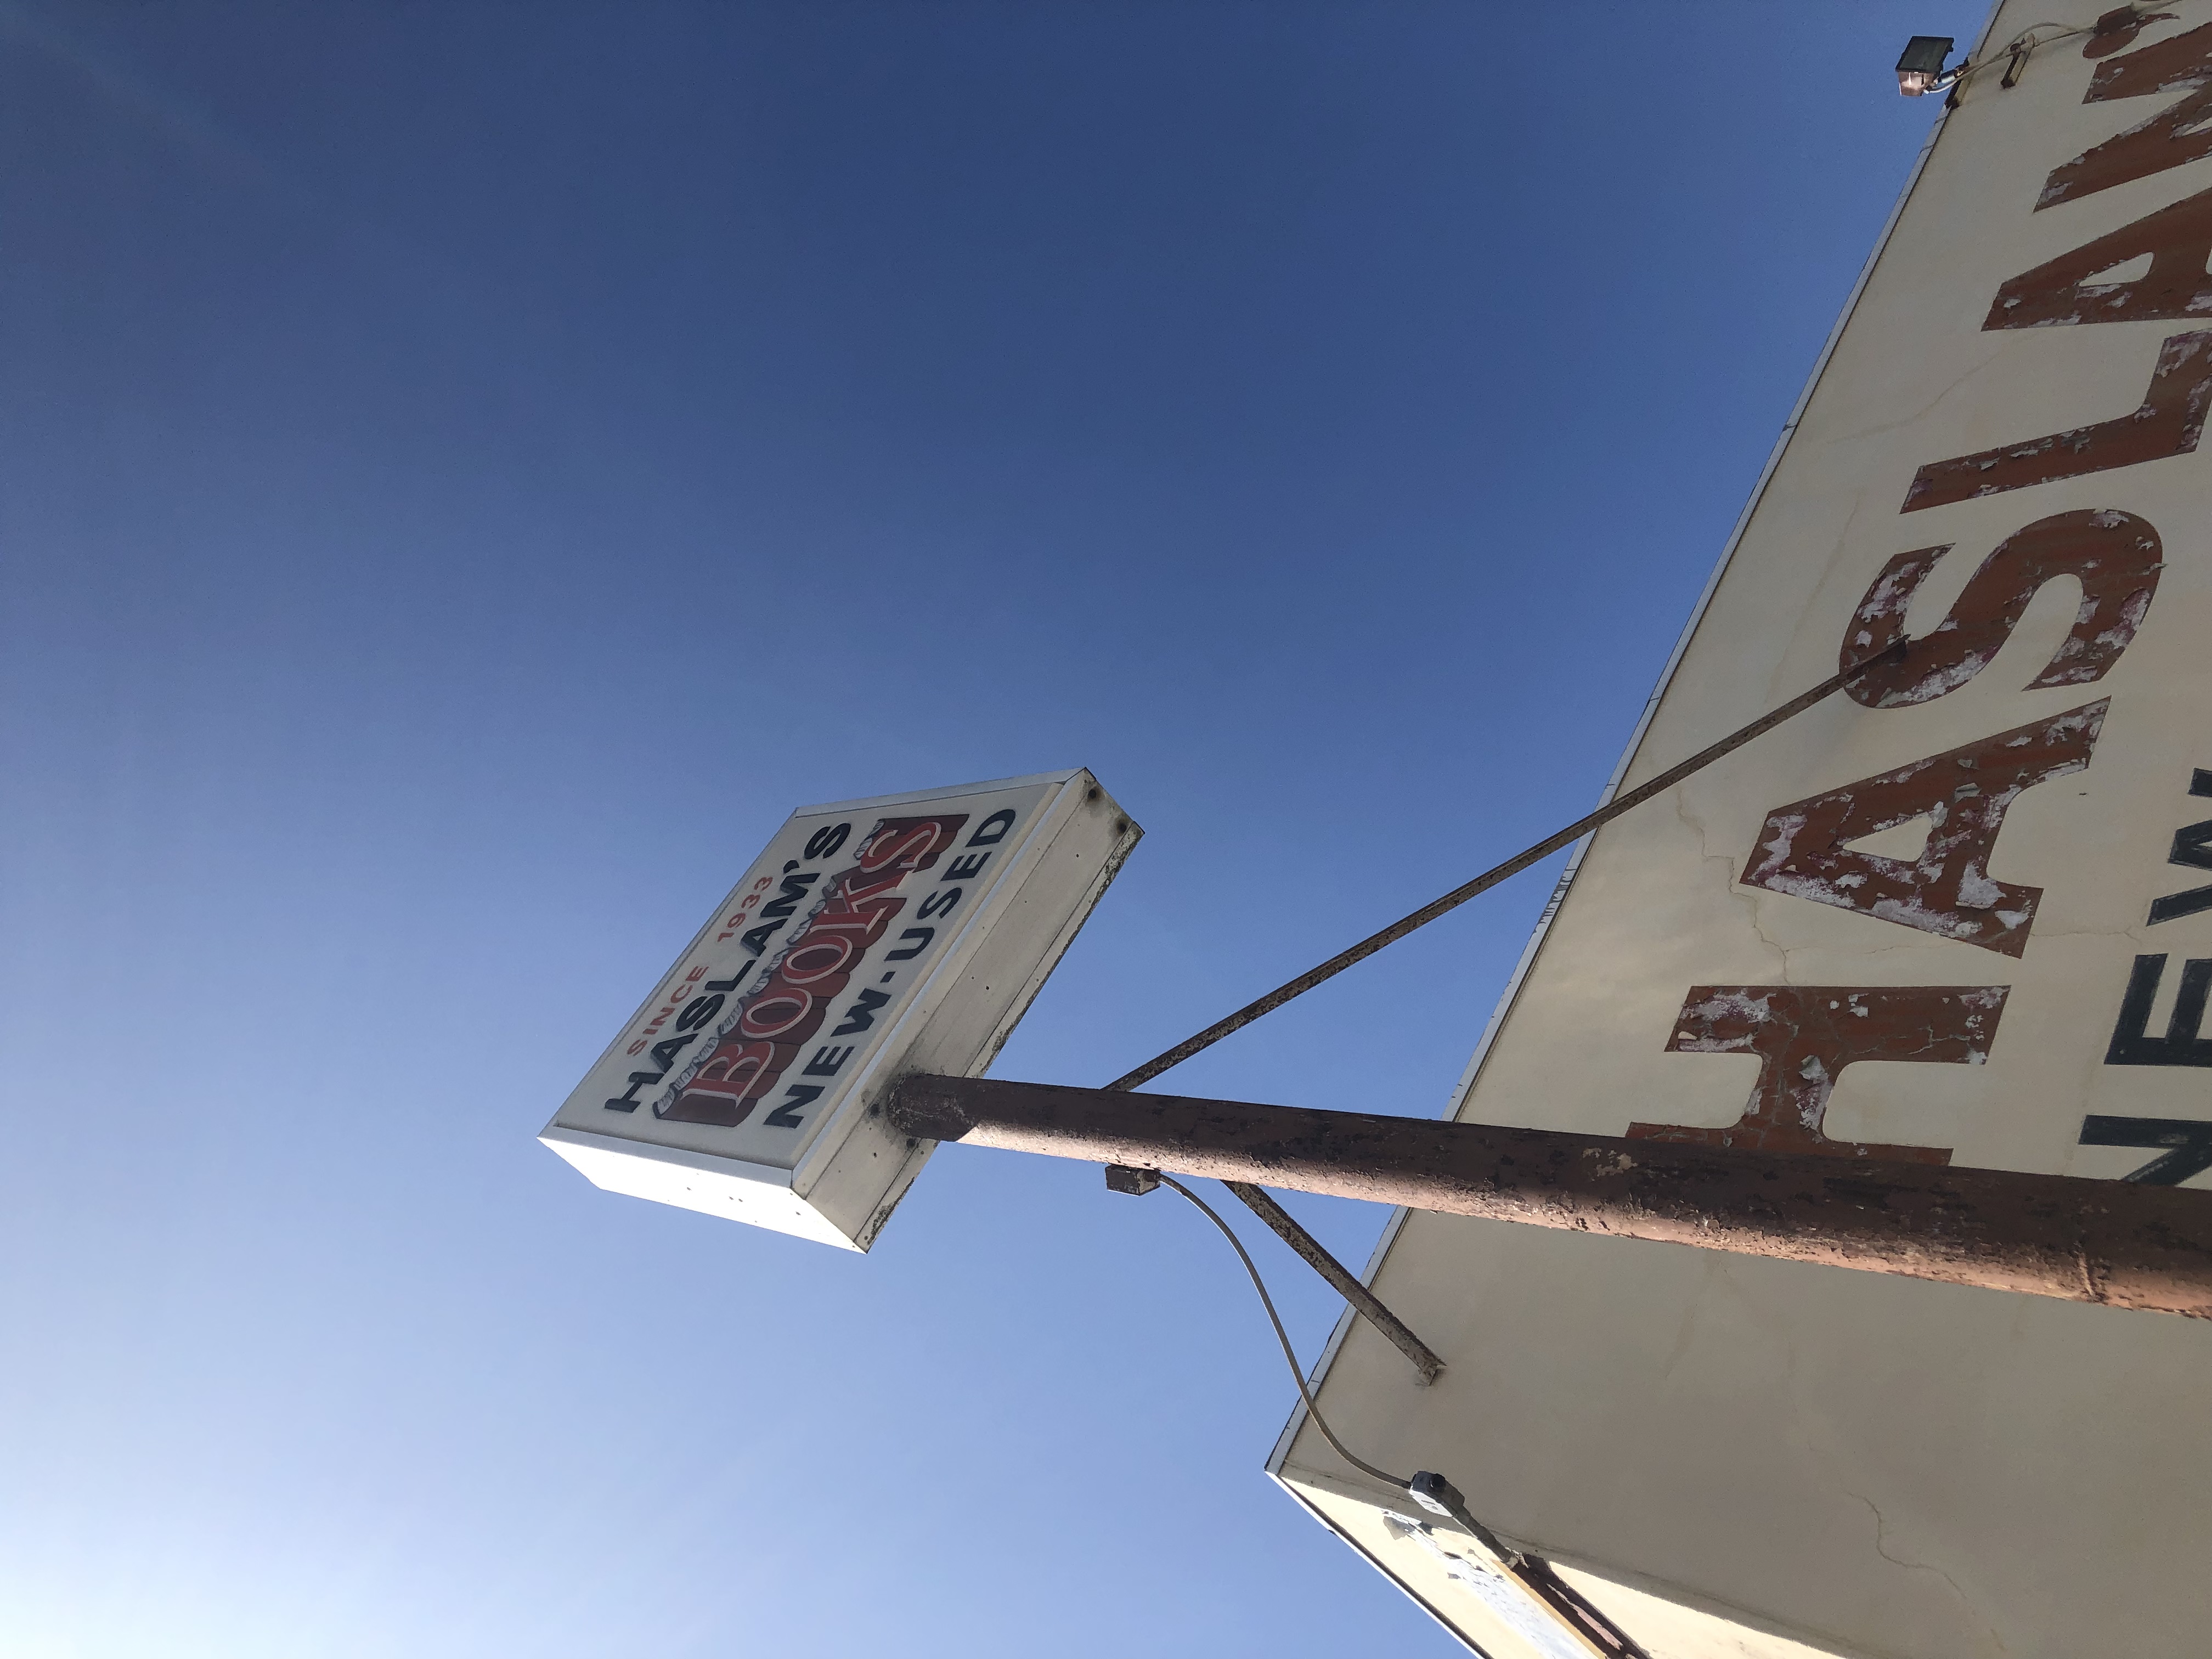 The vintage sign outside of Haslam’s Bookstore reads “Since 1933”